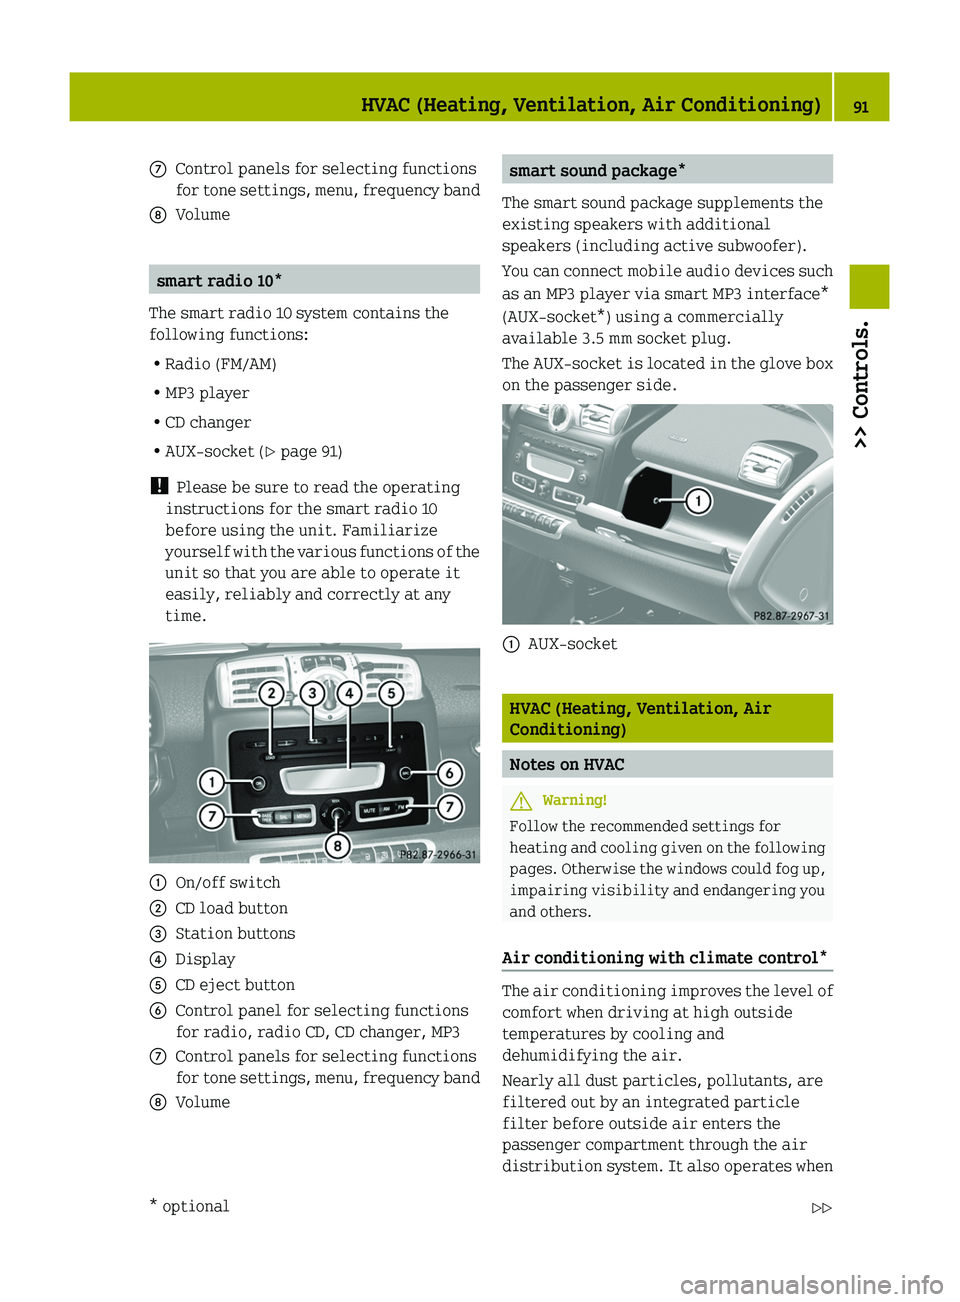 SMART FORTWO COUPE 2010  Owners Manual 006EControl panels for selecting functions
for tone settings, menu, frequency band006FVolume
smart radio 10* 
The smart radio 10 system contains the
following functions:
R Radio (FM/AM)
R MP3 player
R